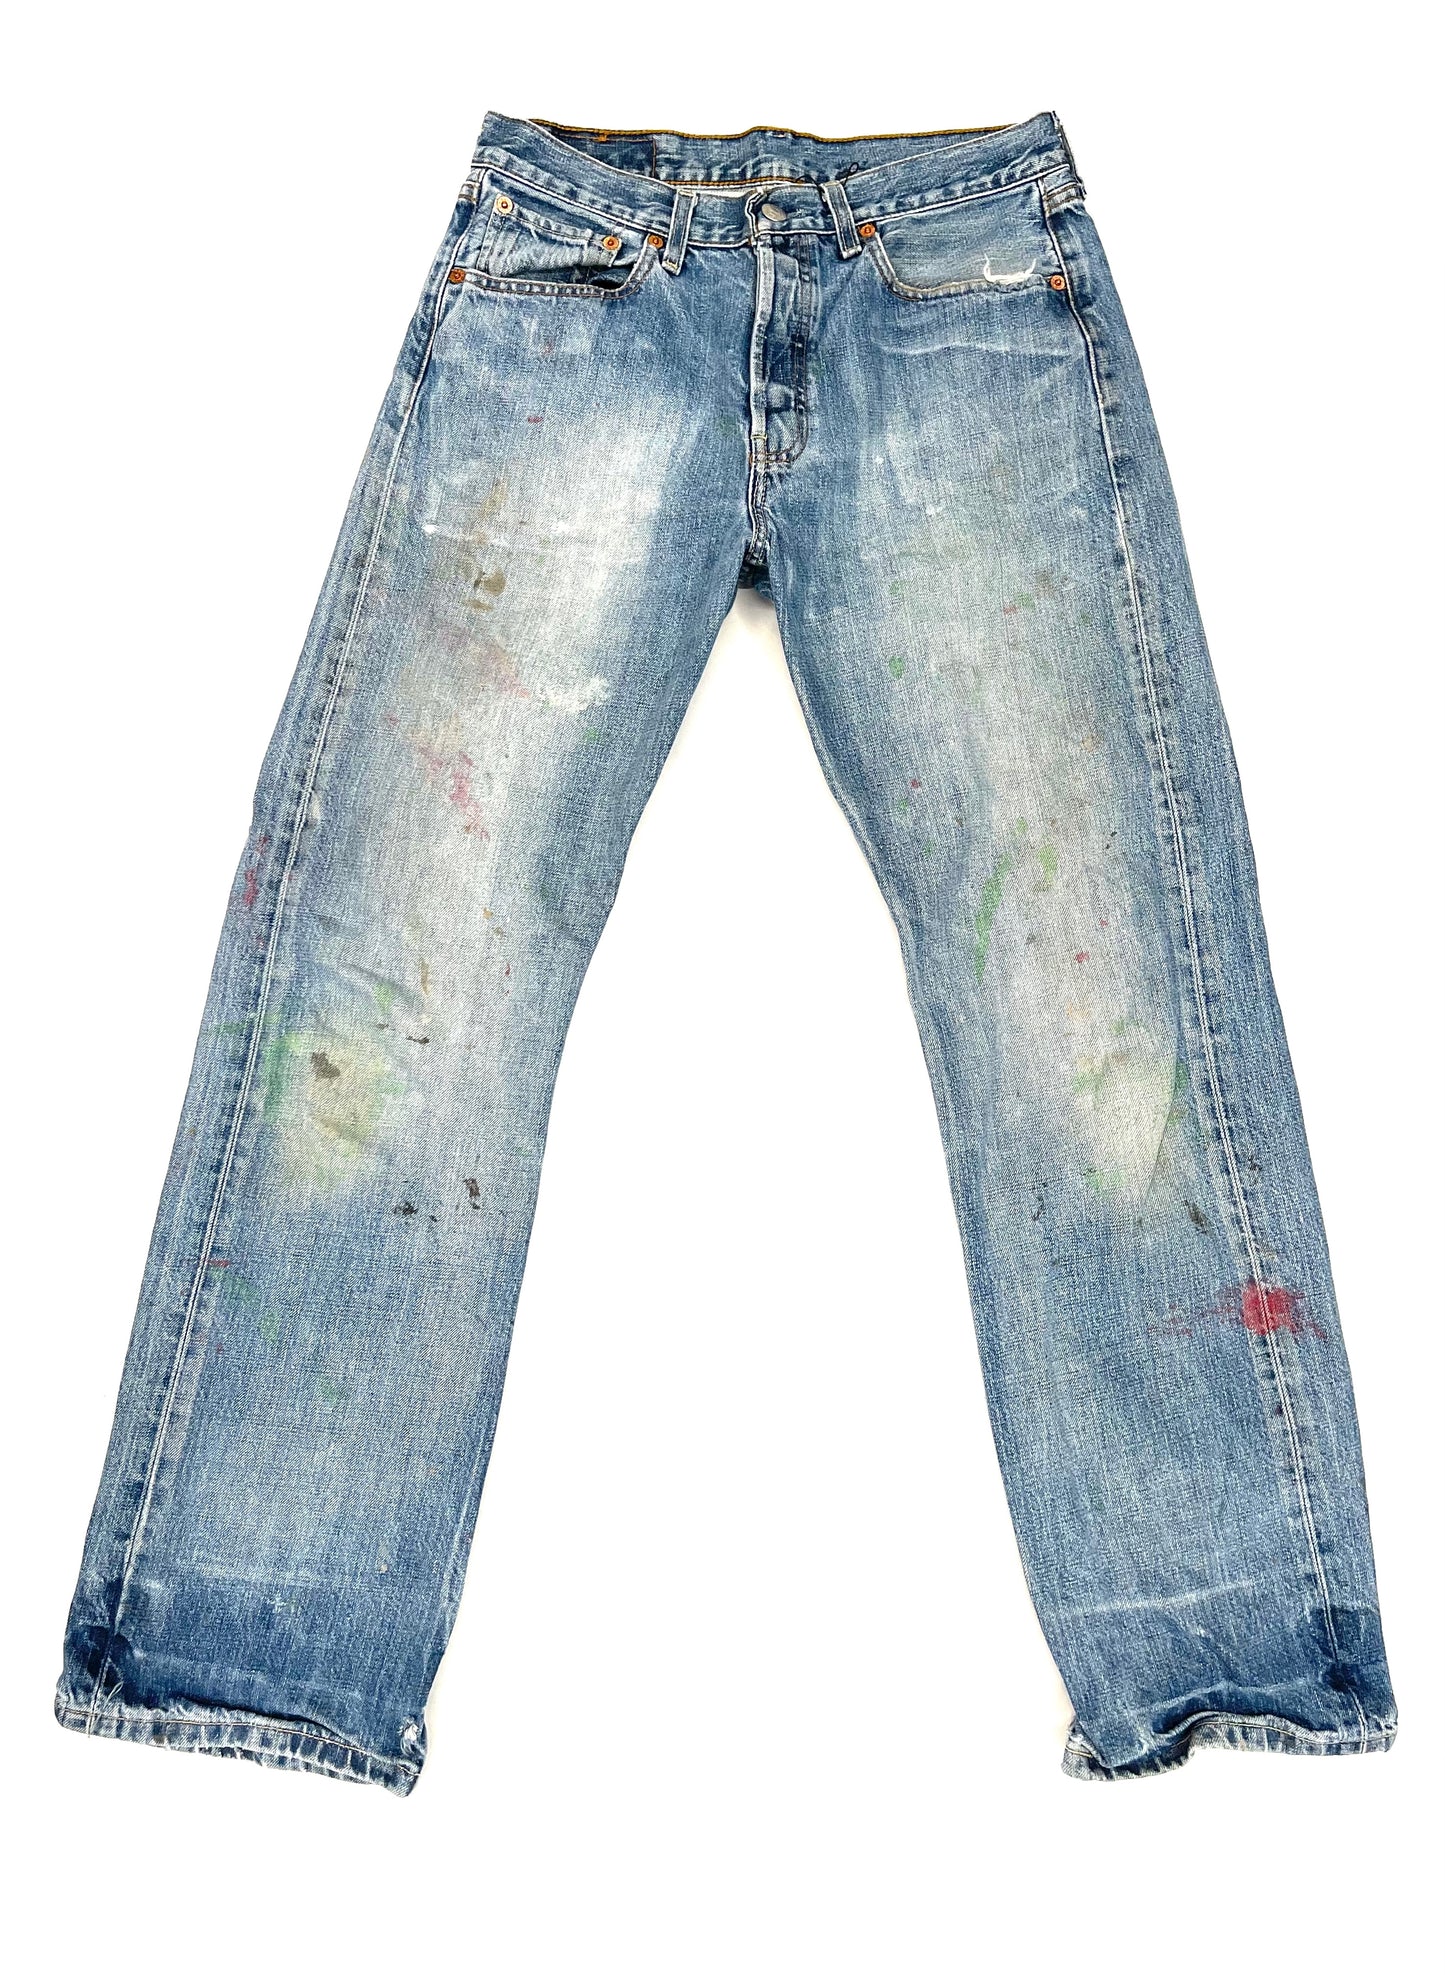 LEVI'S 501 PAINTED 30/32